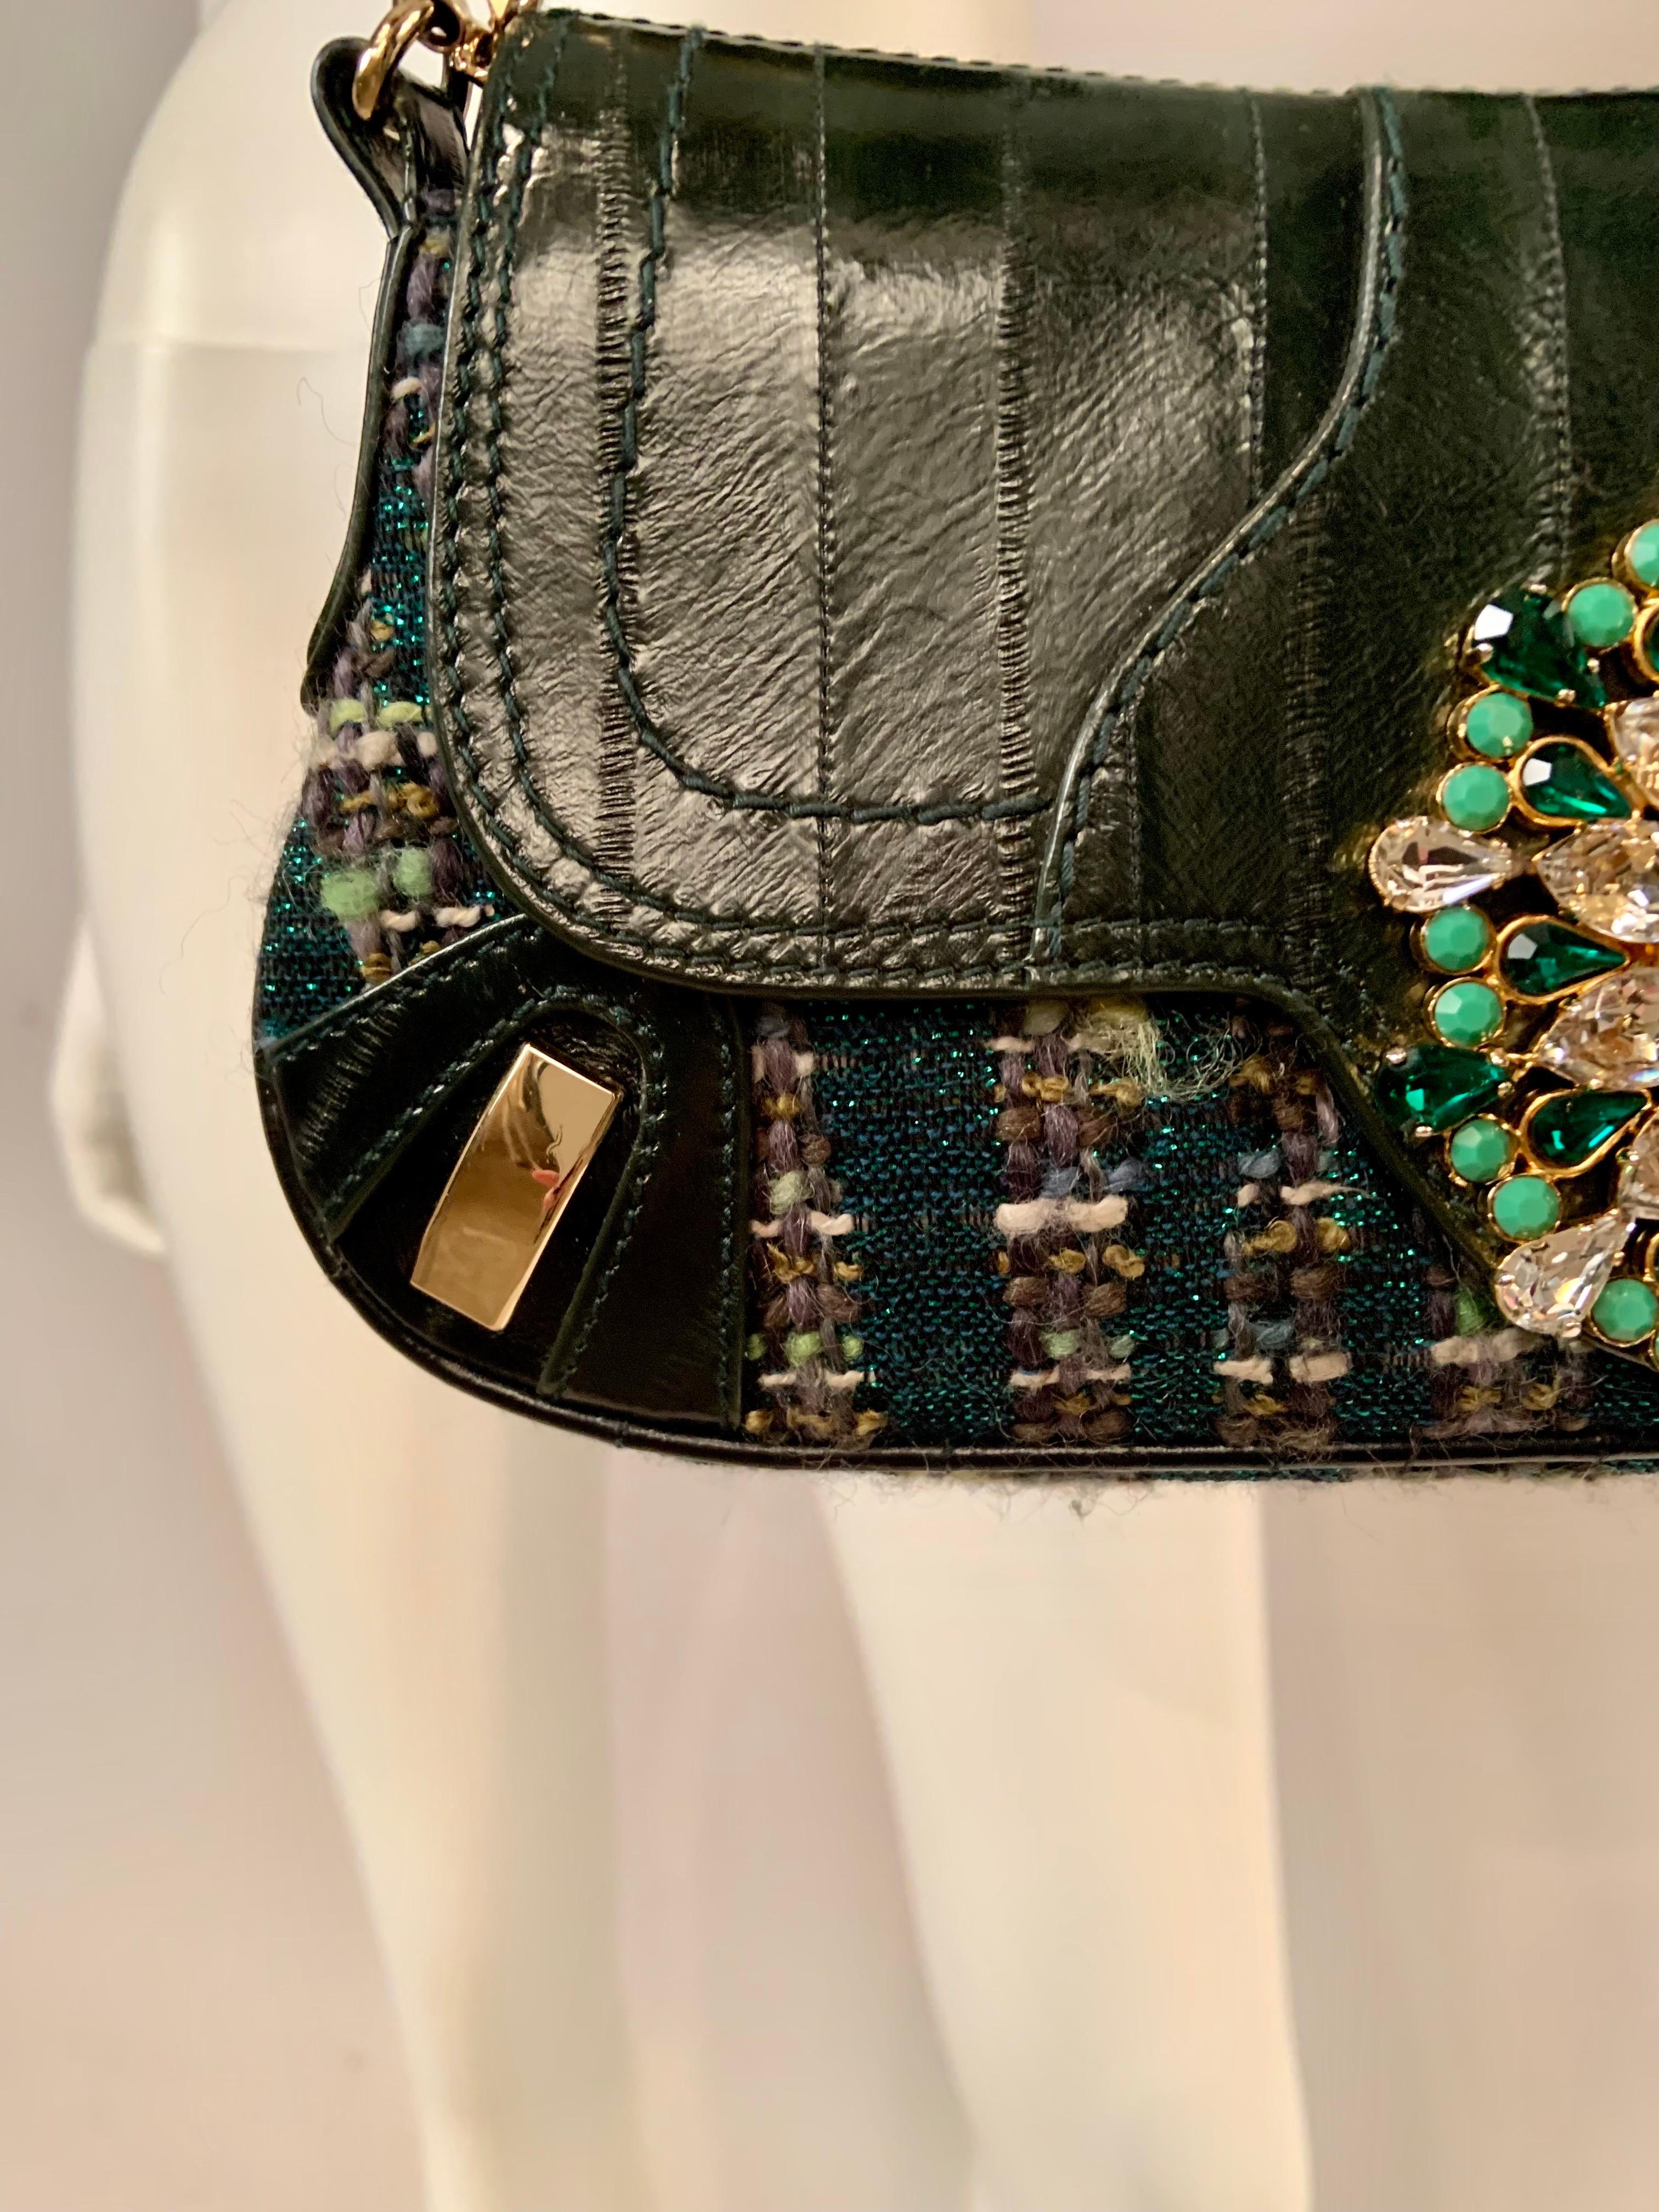 Dolce & Gabbana Green Leather and Tweed Bag with Oversized Jewel Clasp In Excellent Condition For Sale In New Hope, PA